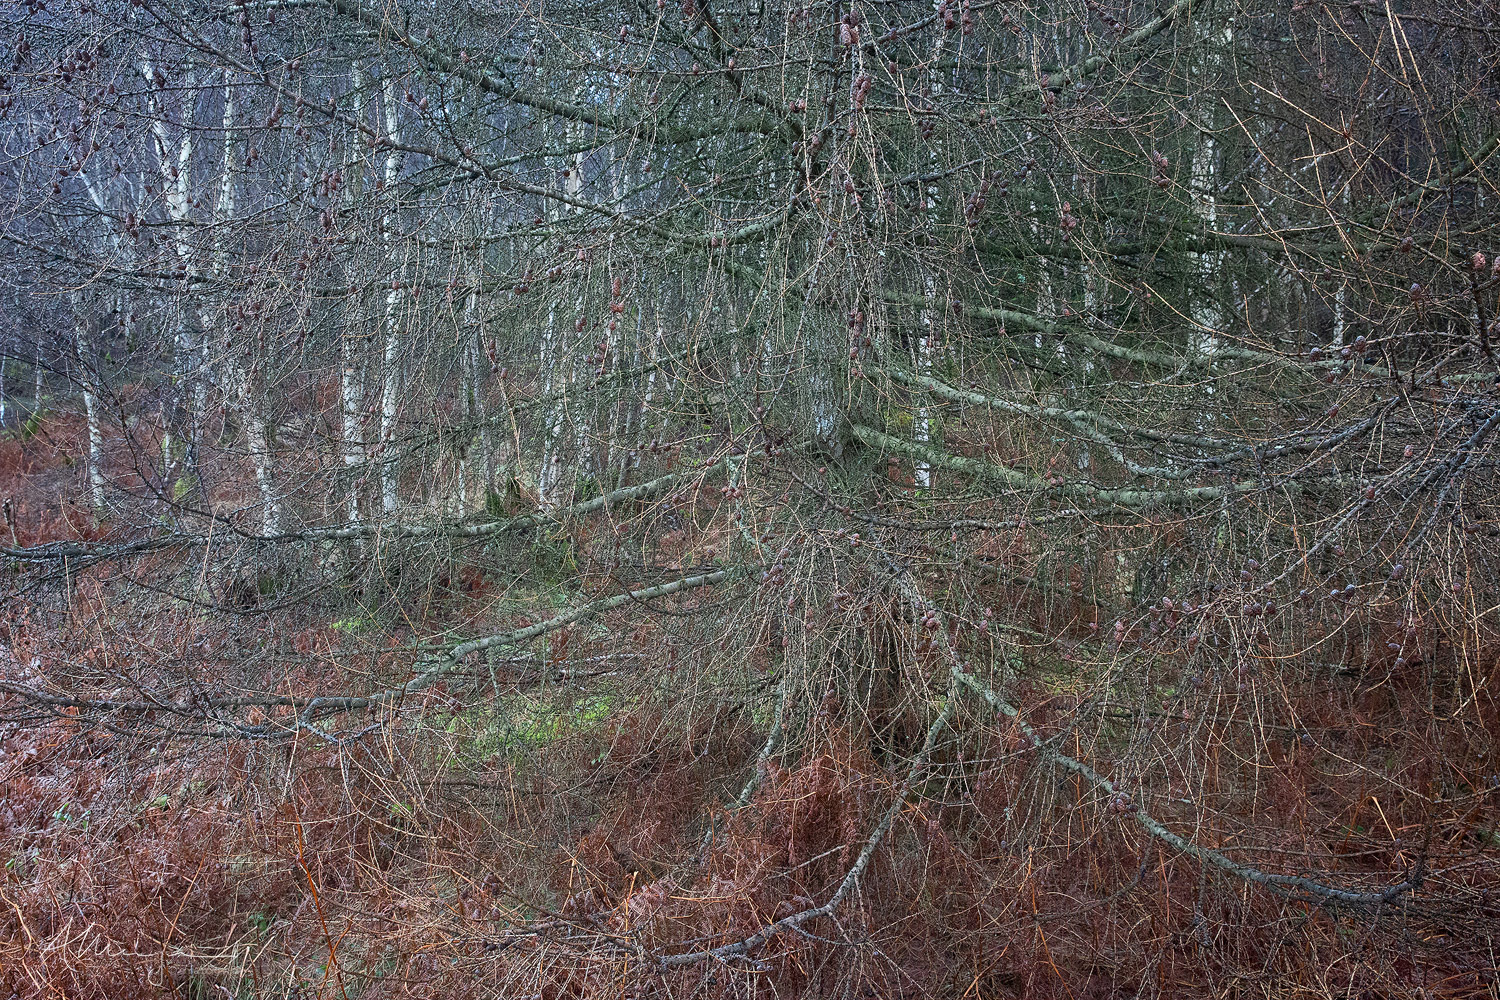 A Scottish woodland in winter drizzle.